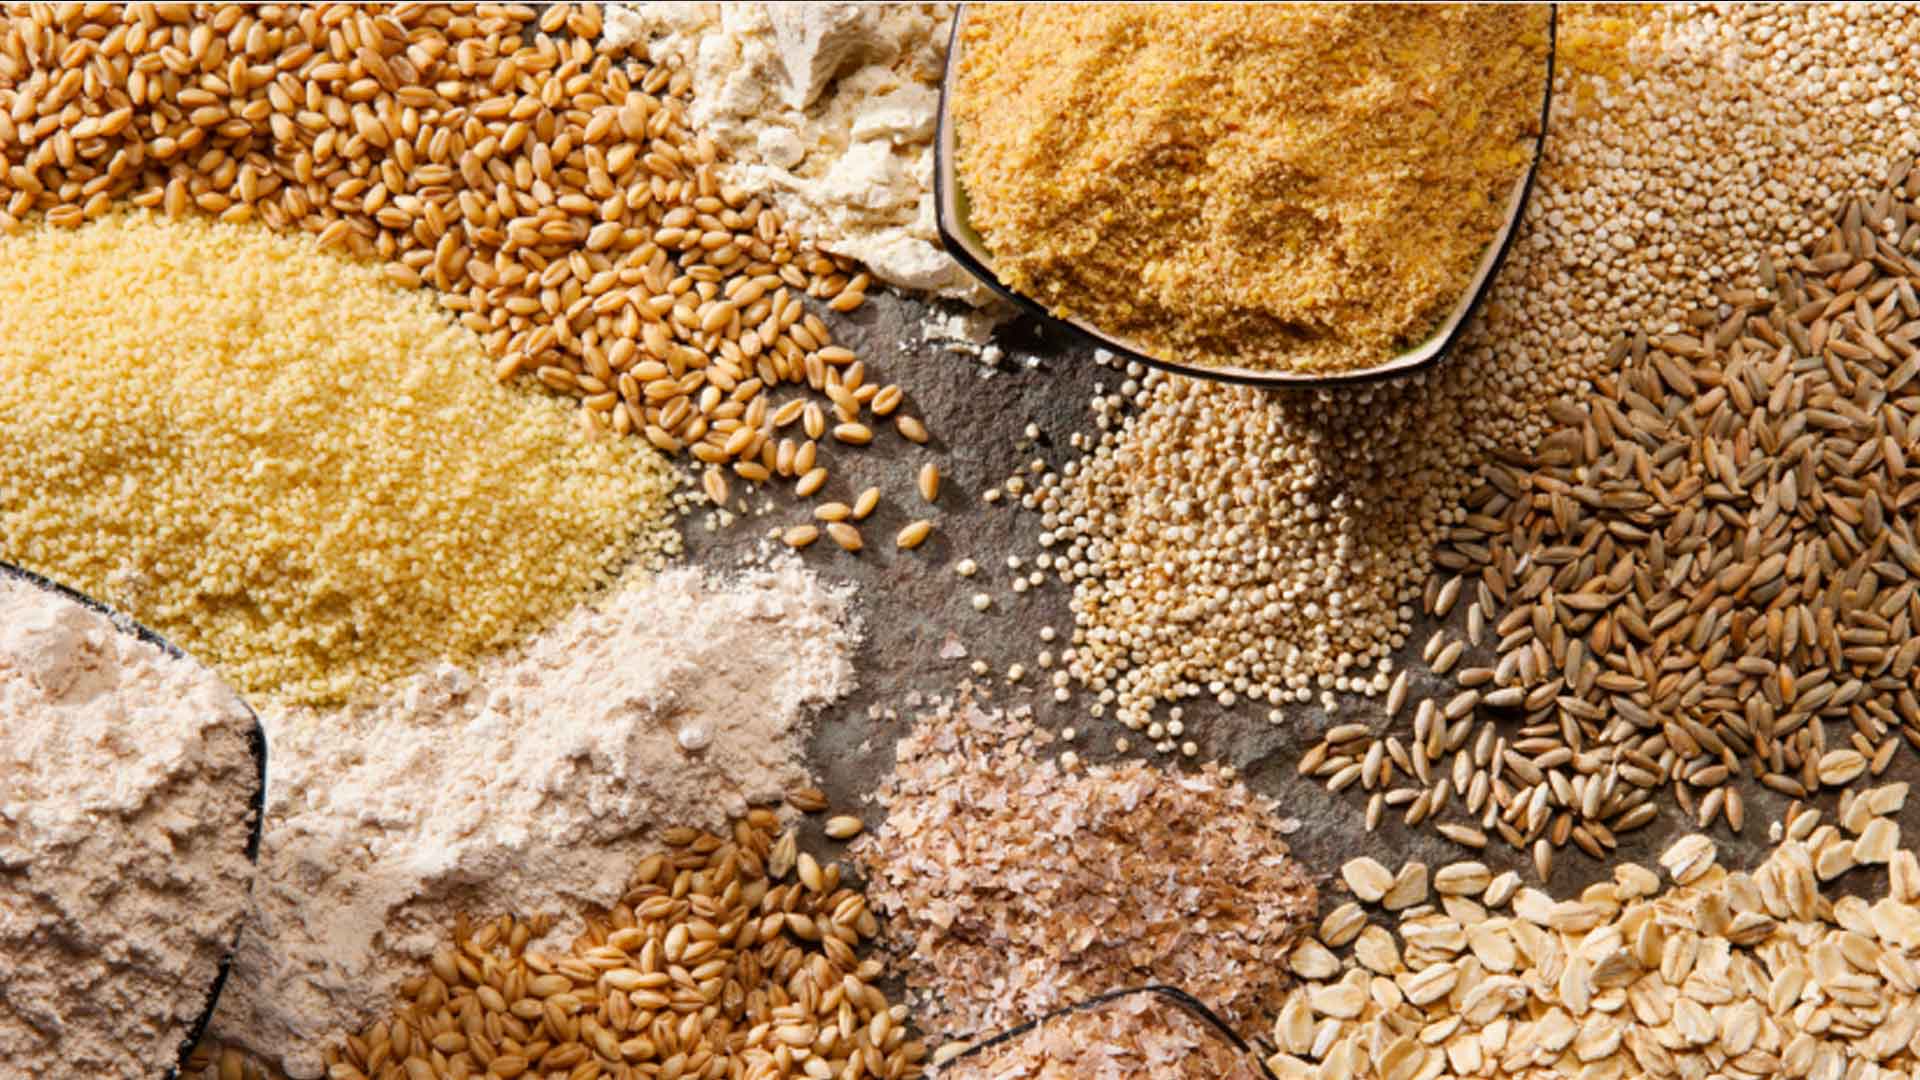 Exports Corn, Grains, and Vegetable Powder